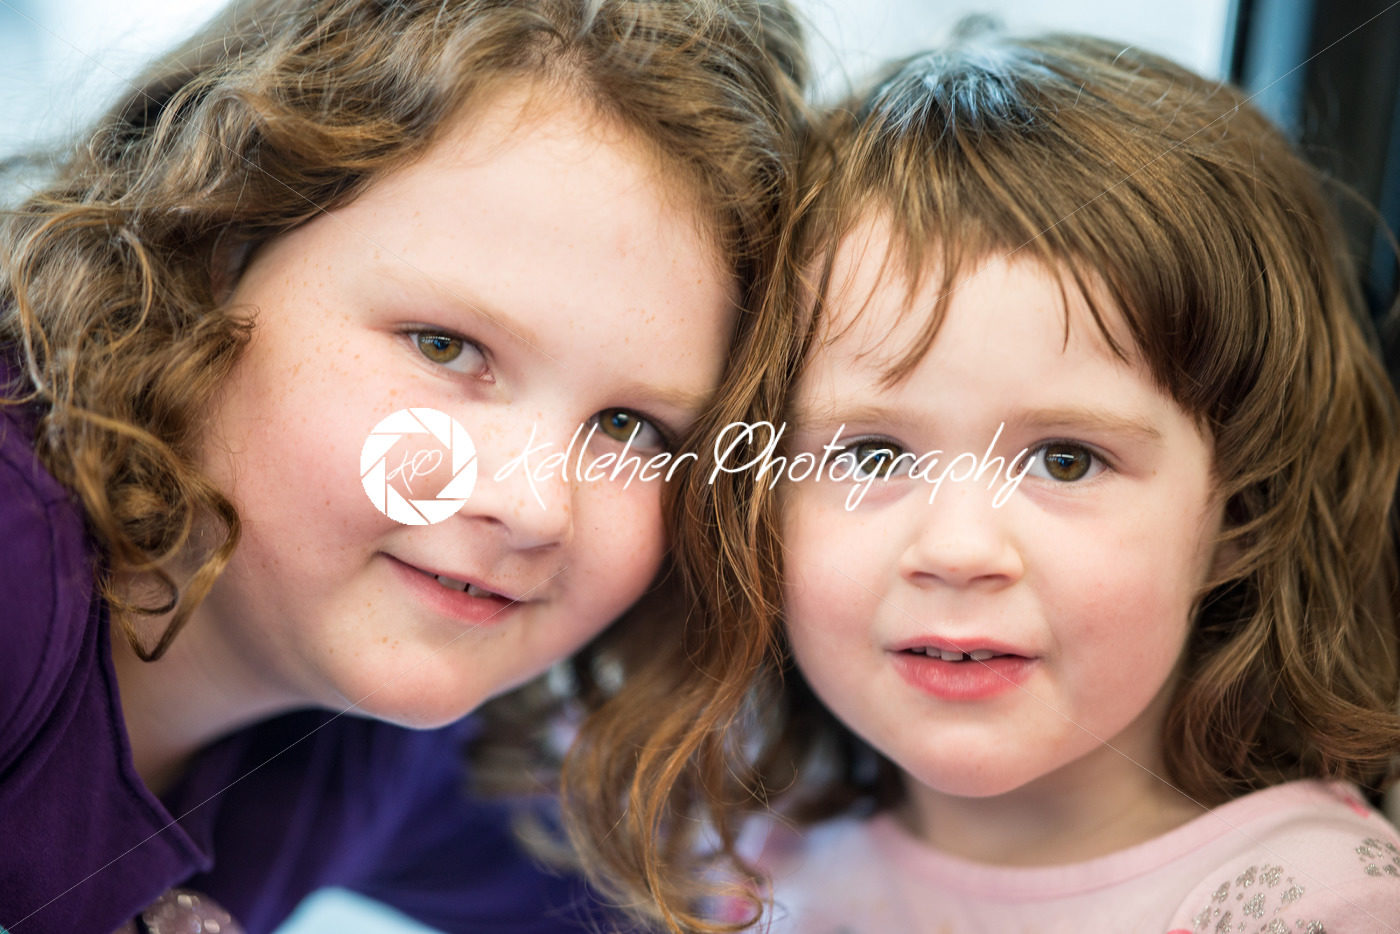 Young sibling girls portrait looking and smiling at the camera. - Kelleher Photography Store